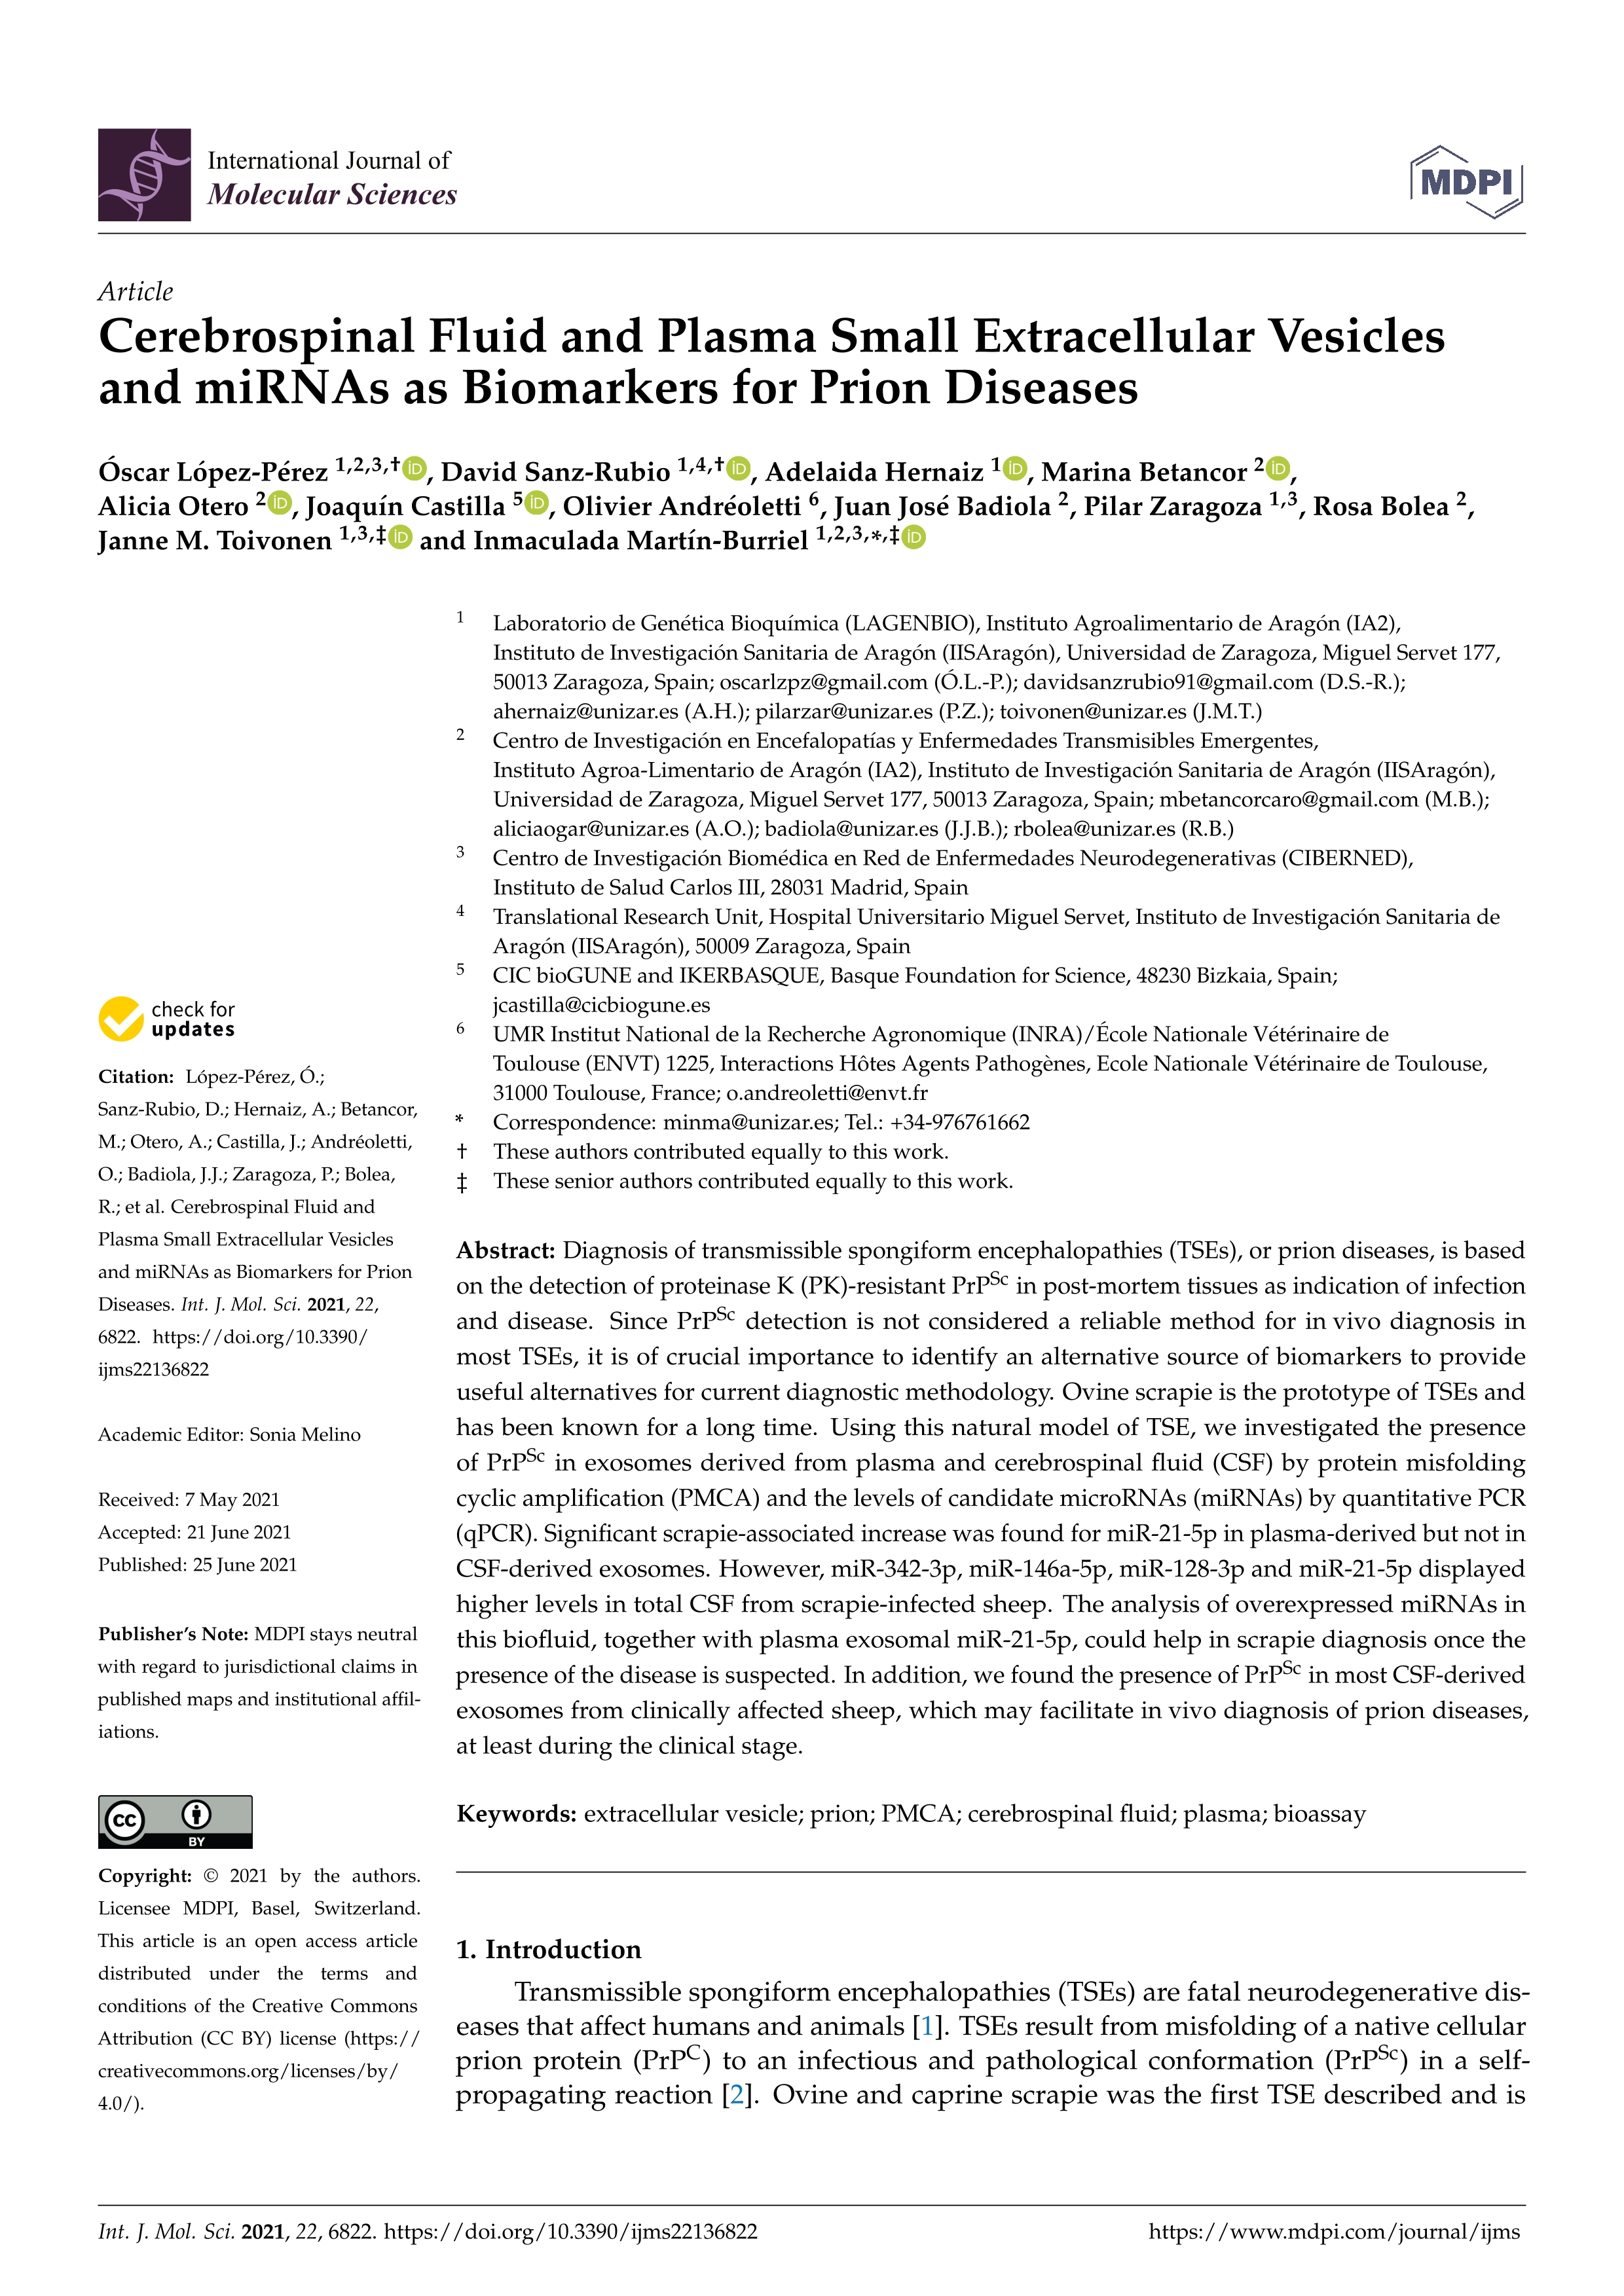 Cerebrospinal fluid and plasma small extracellular vesicles and mirnas as biomarkers for prion diseases